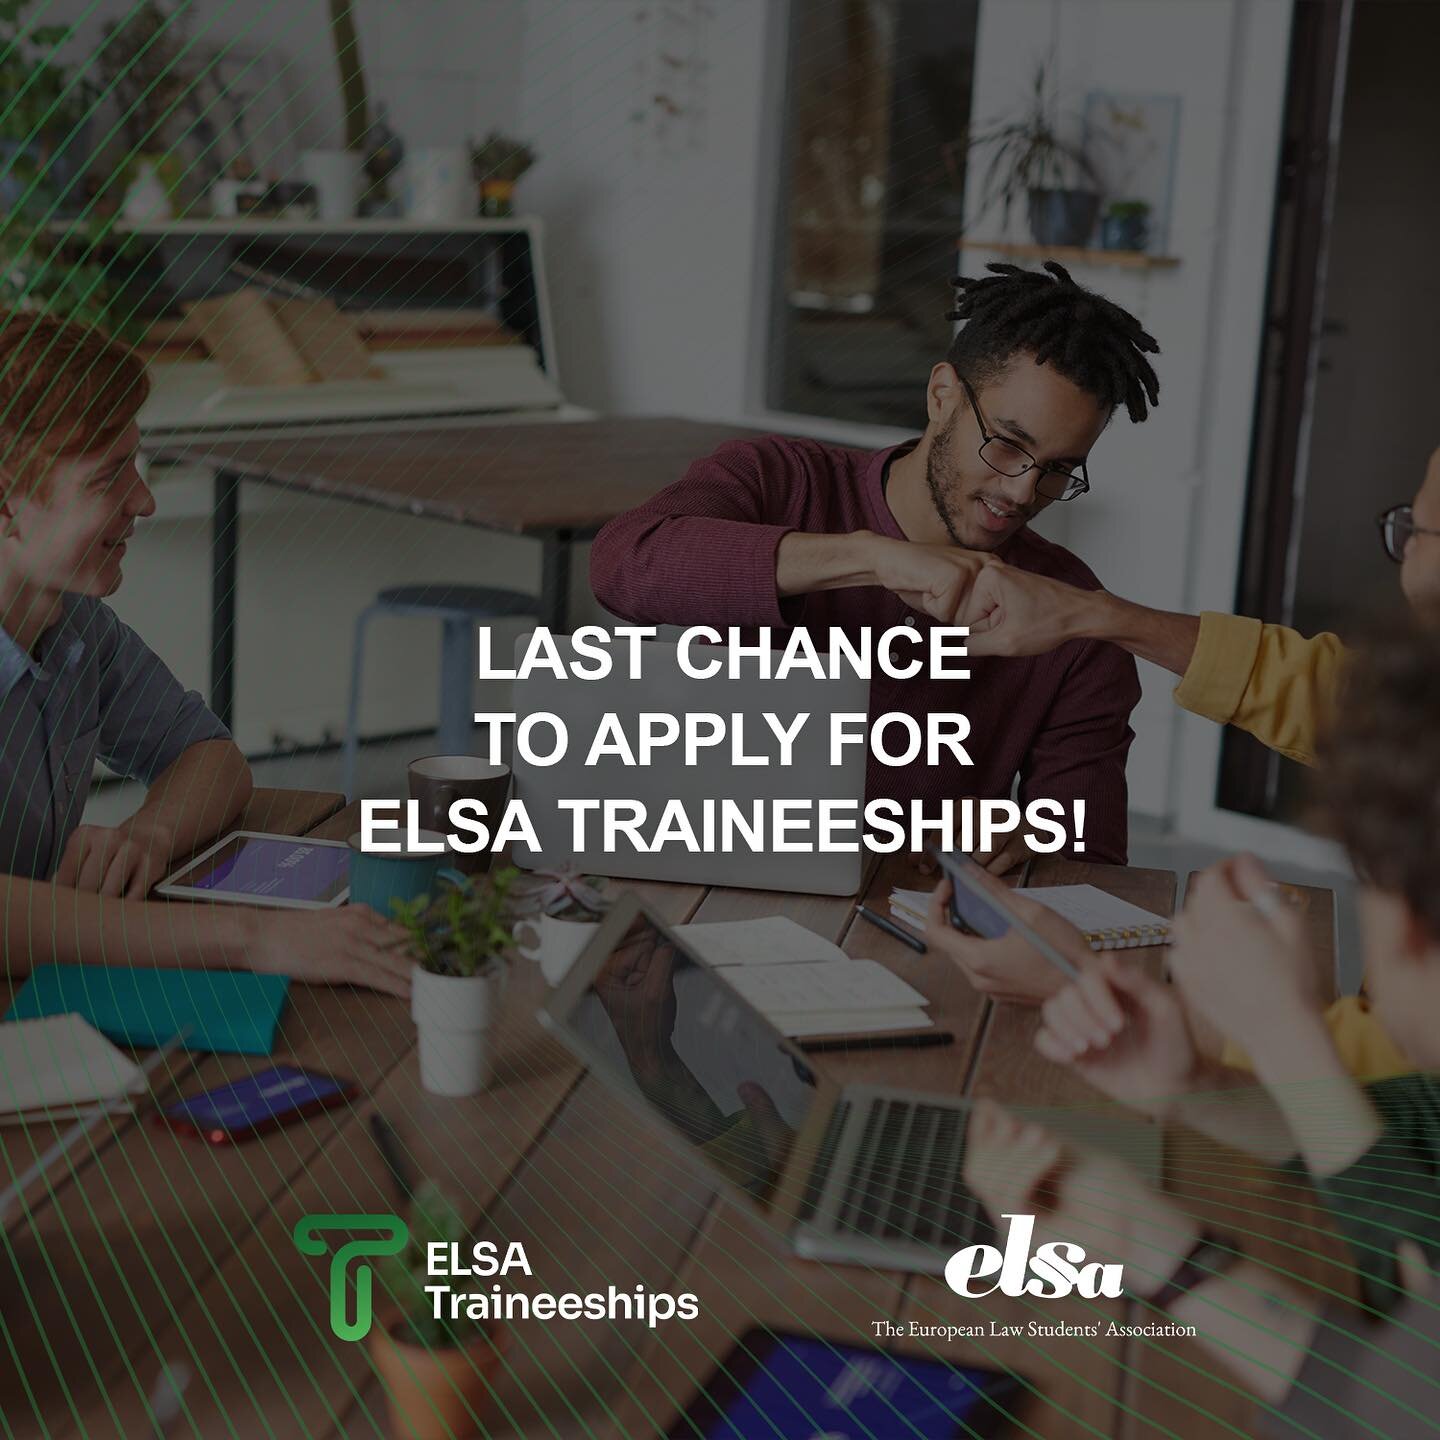 Last chance to apply for ELSA Traineeships!

Applications close today, 4th December at 22:59 GMT.

Don't miss out and apply now at traineeships.elsa.org